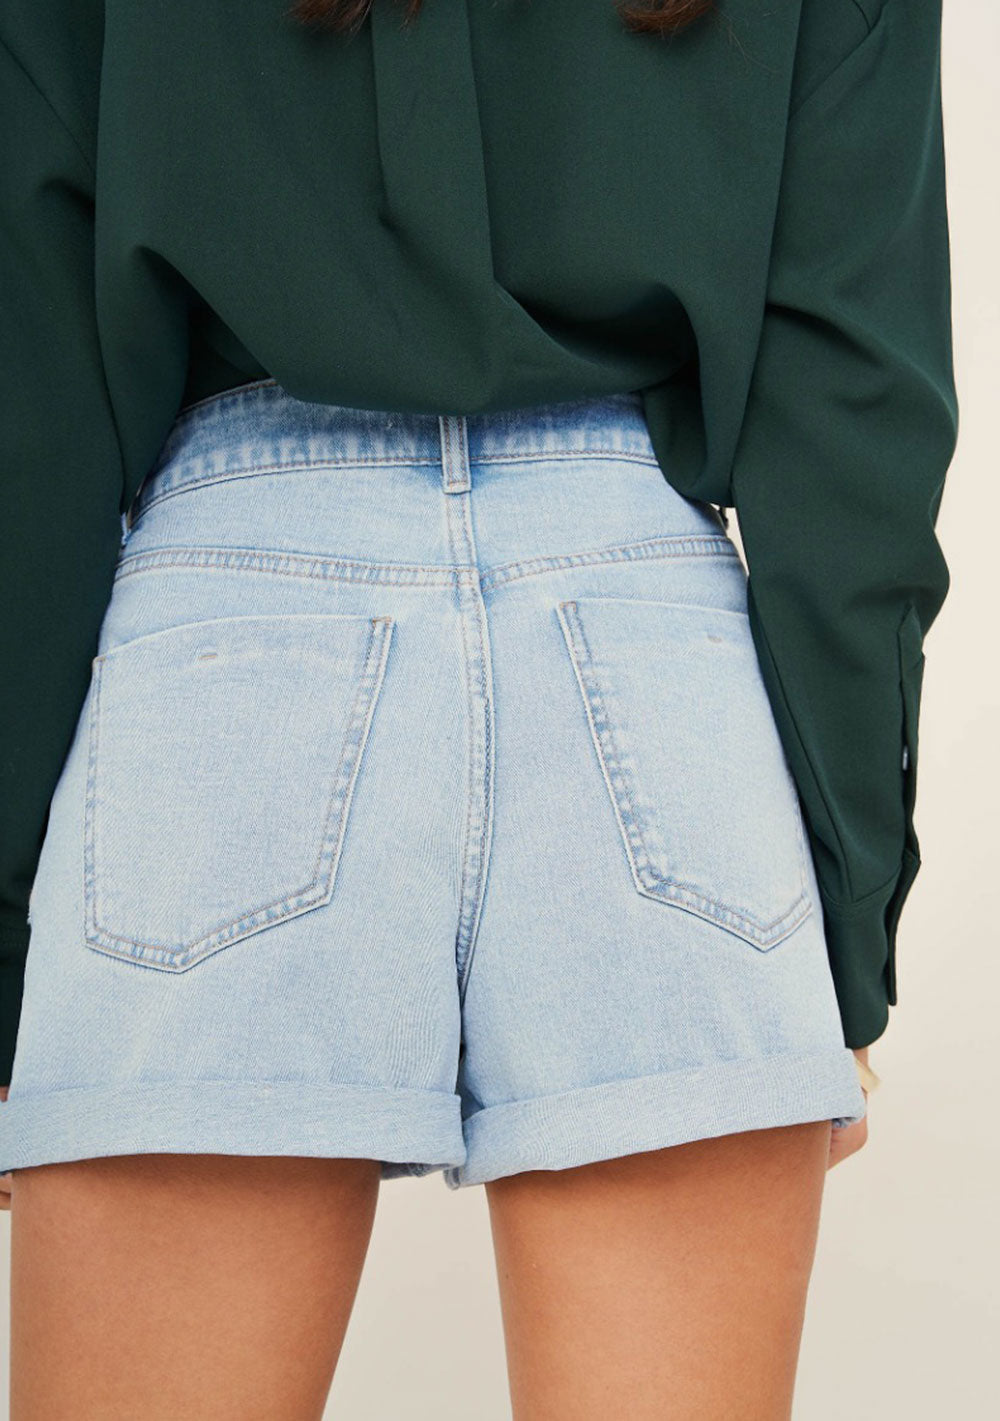 ♡ Jeans Shorts